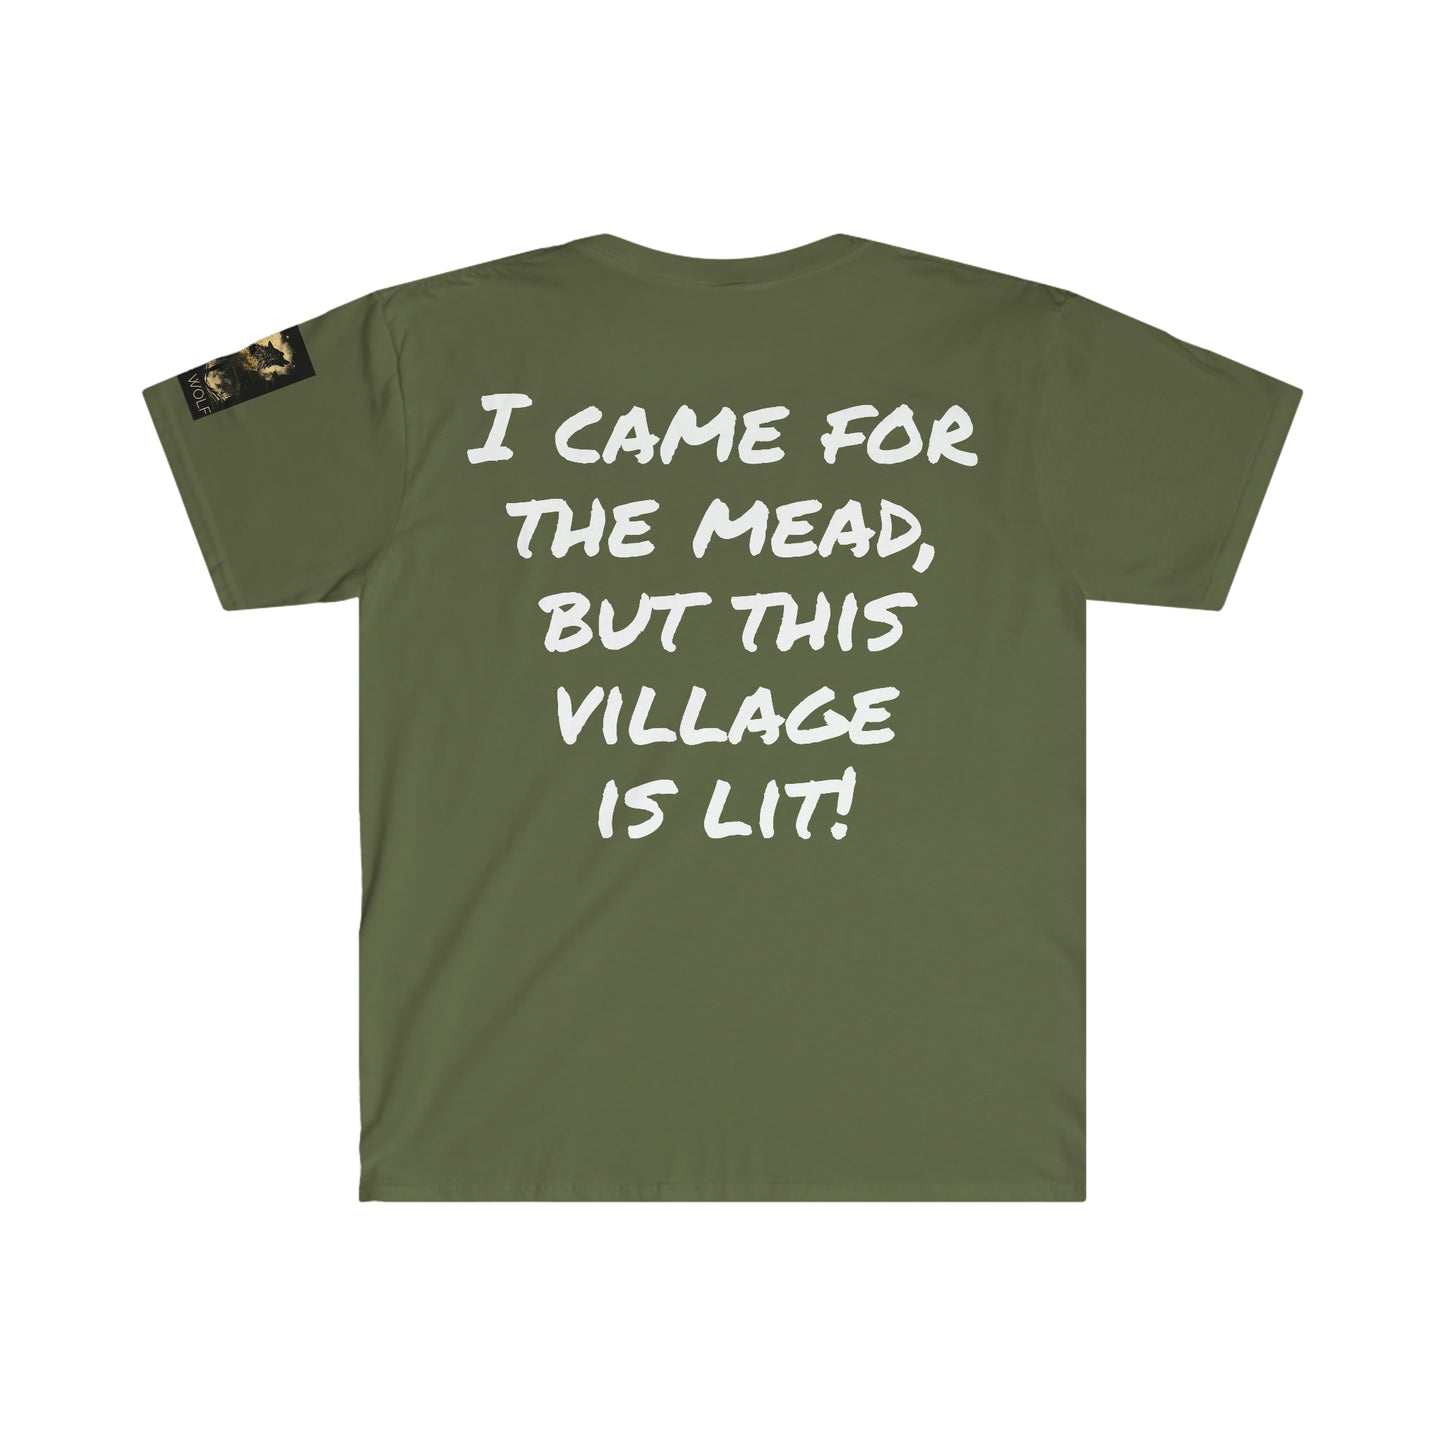 I came for the mead, but this village is lit!